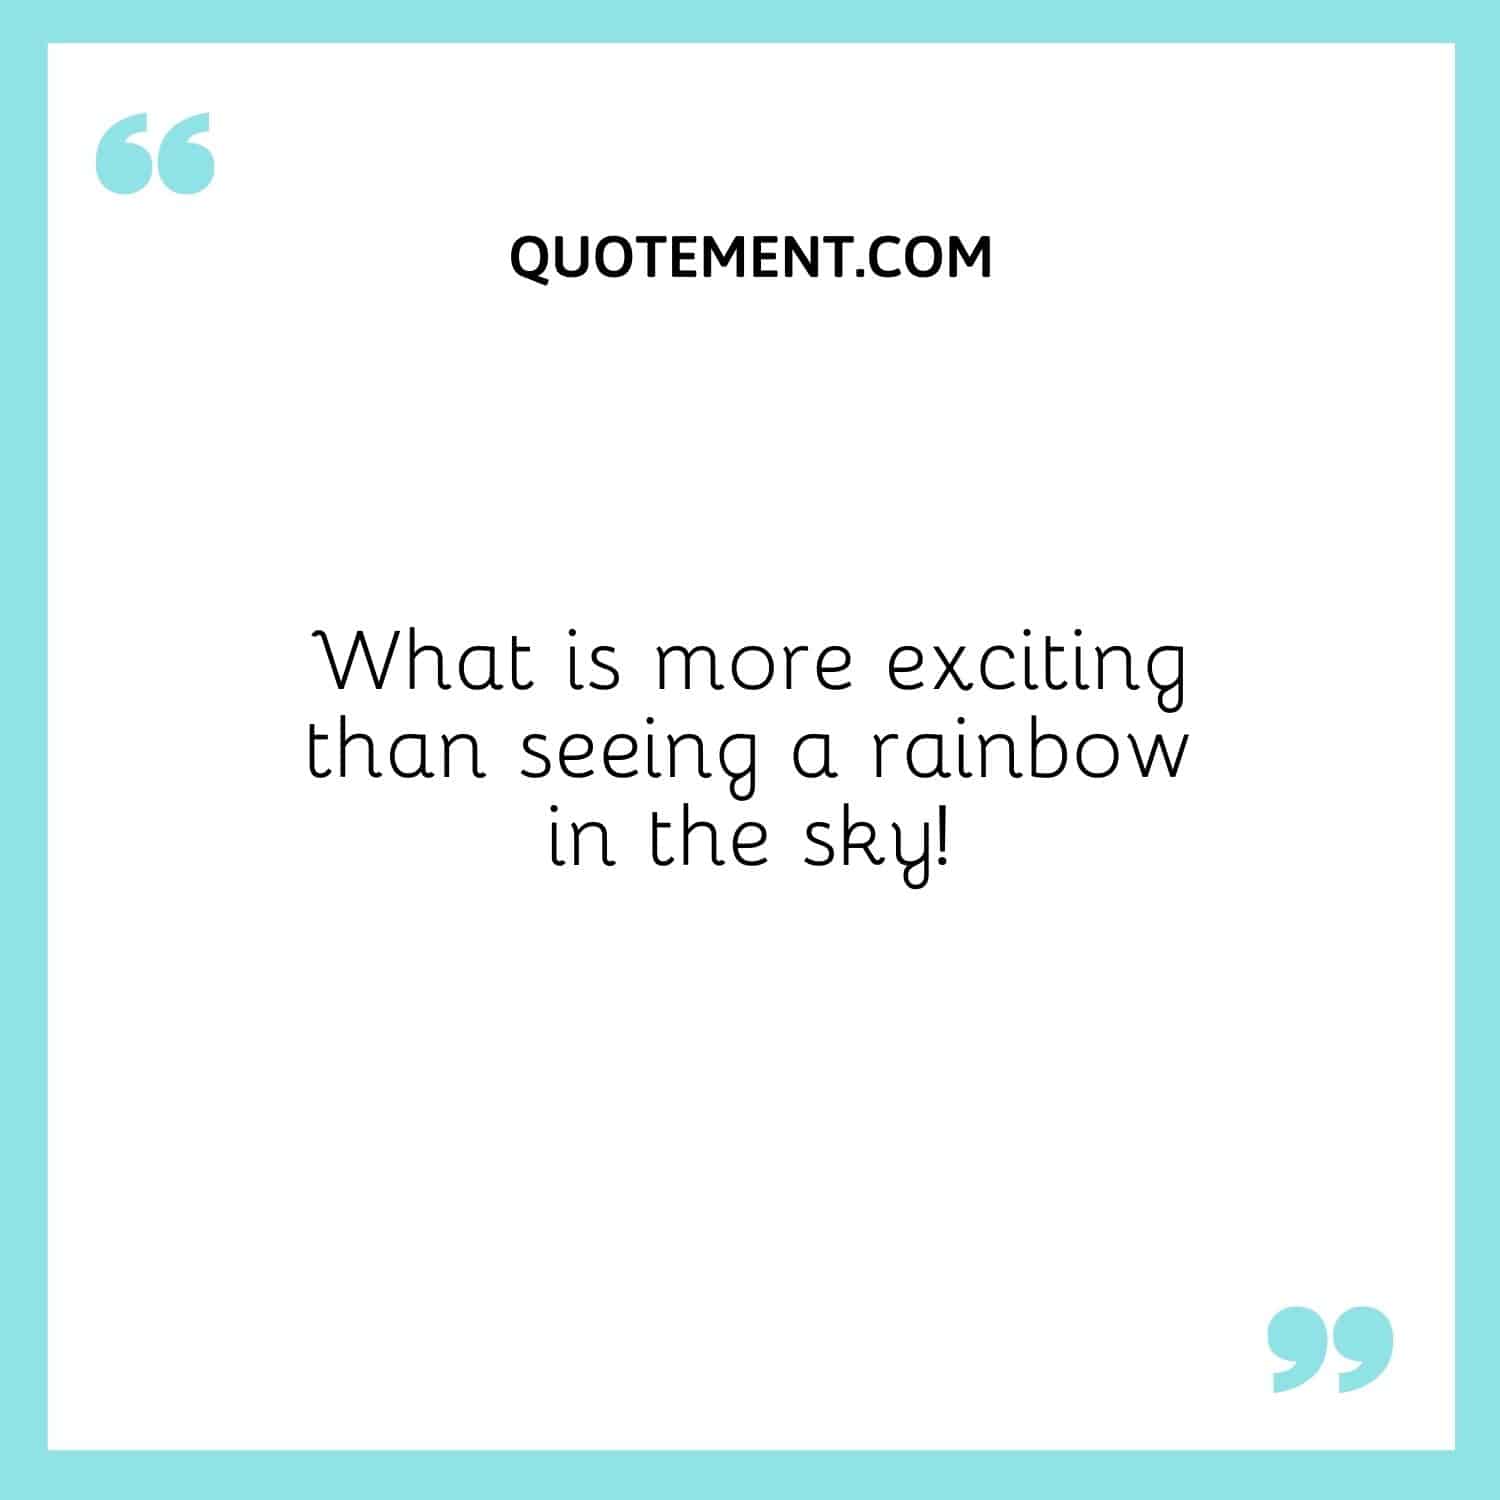 What is more exciting than seeing a rainbow in the sky